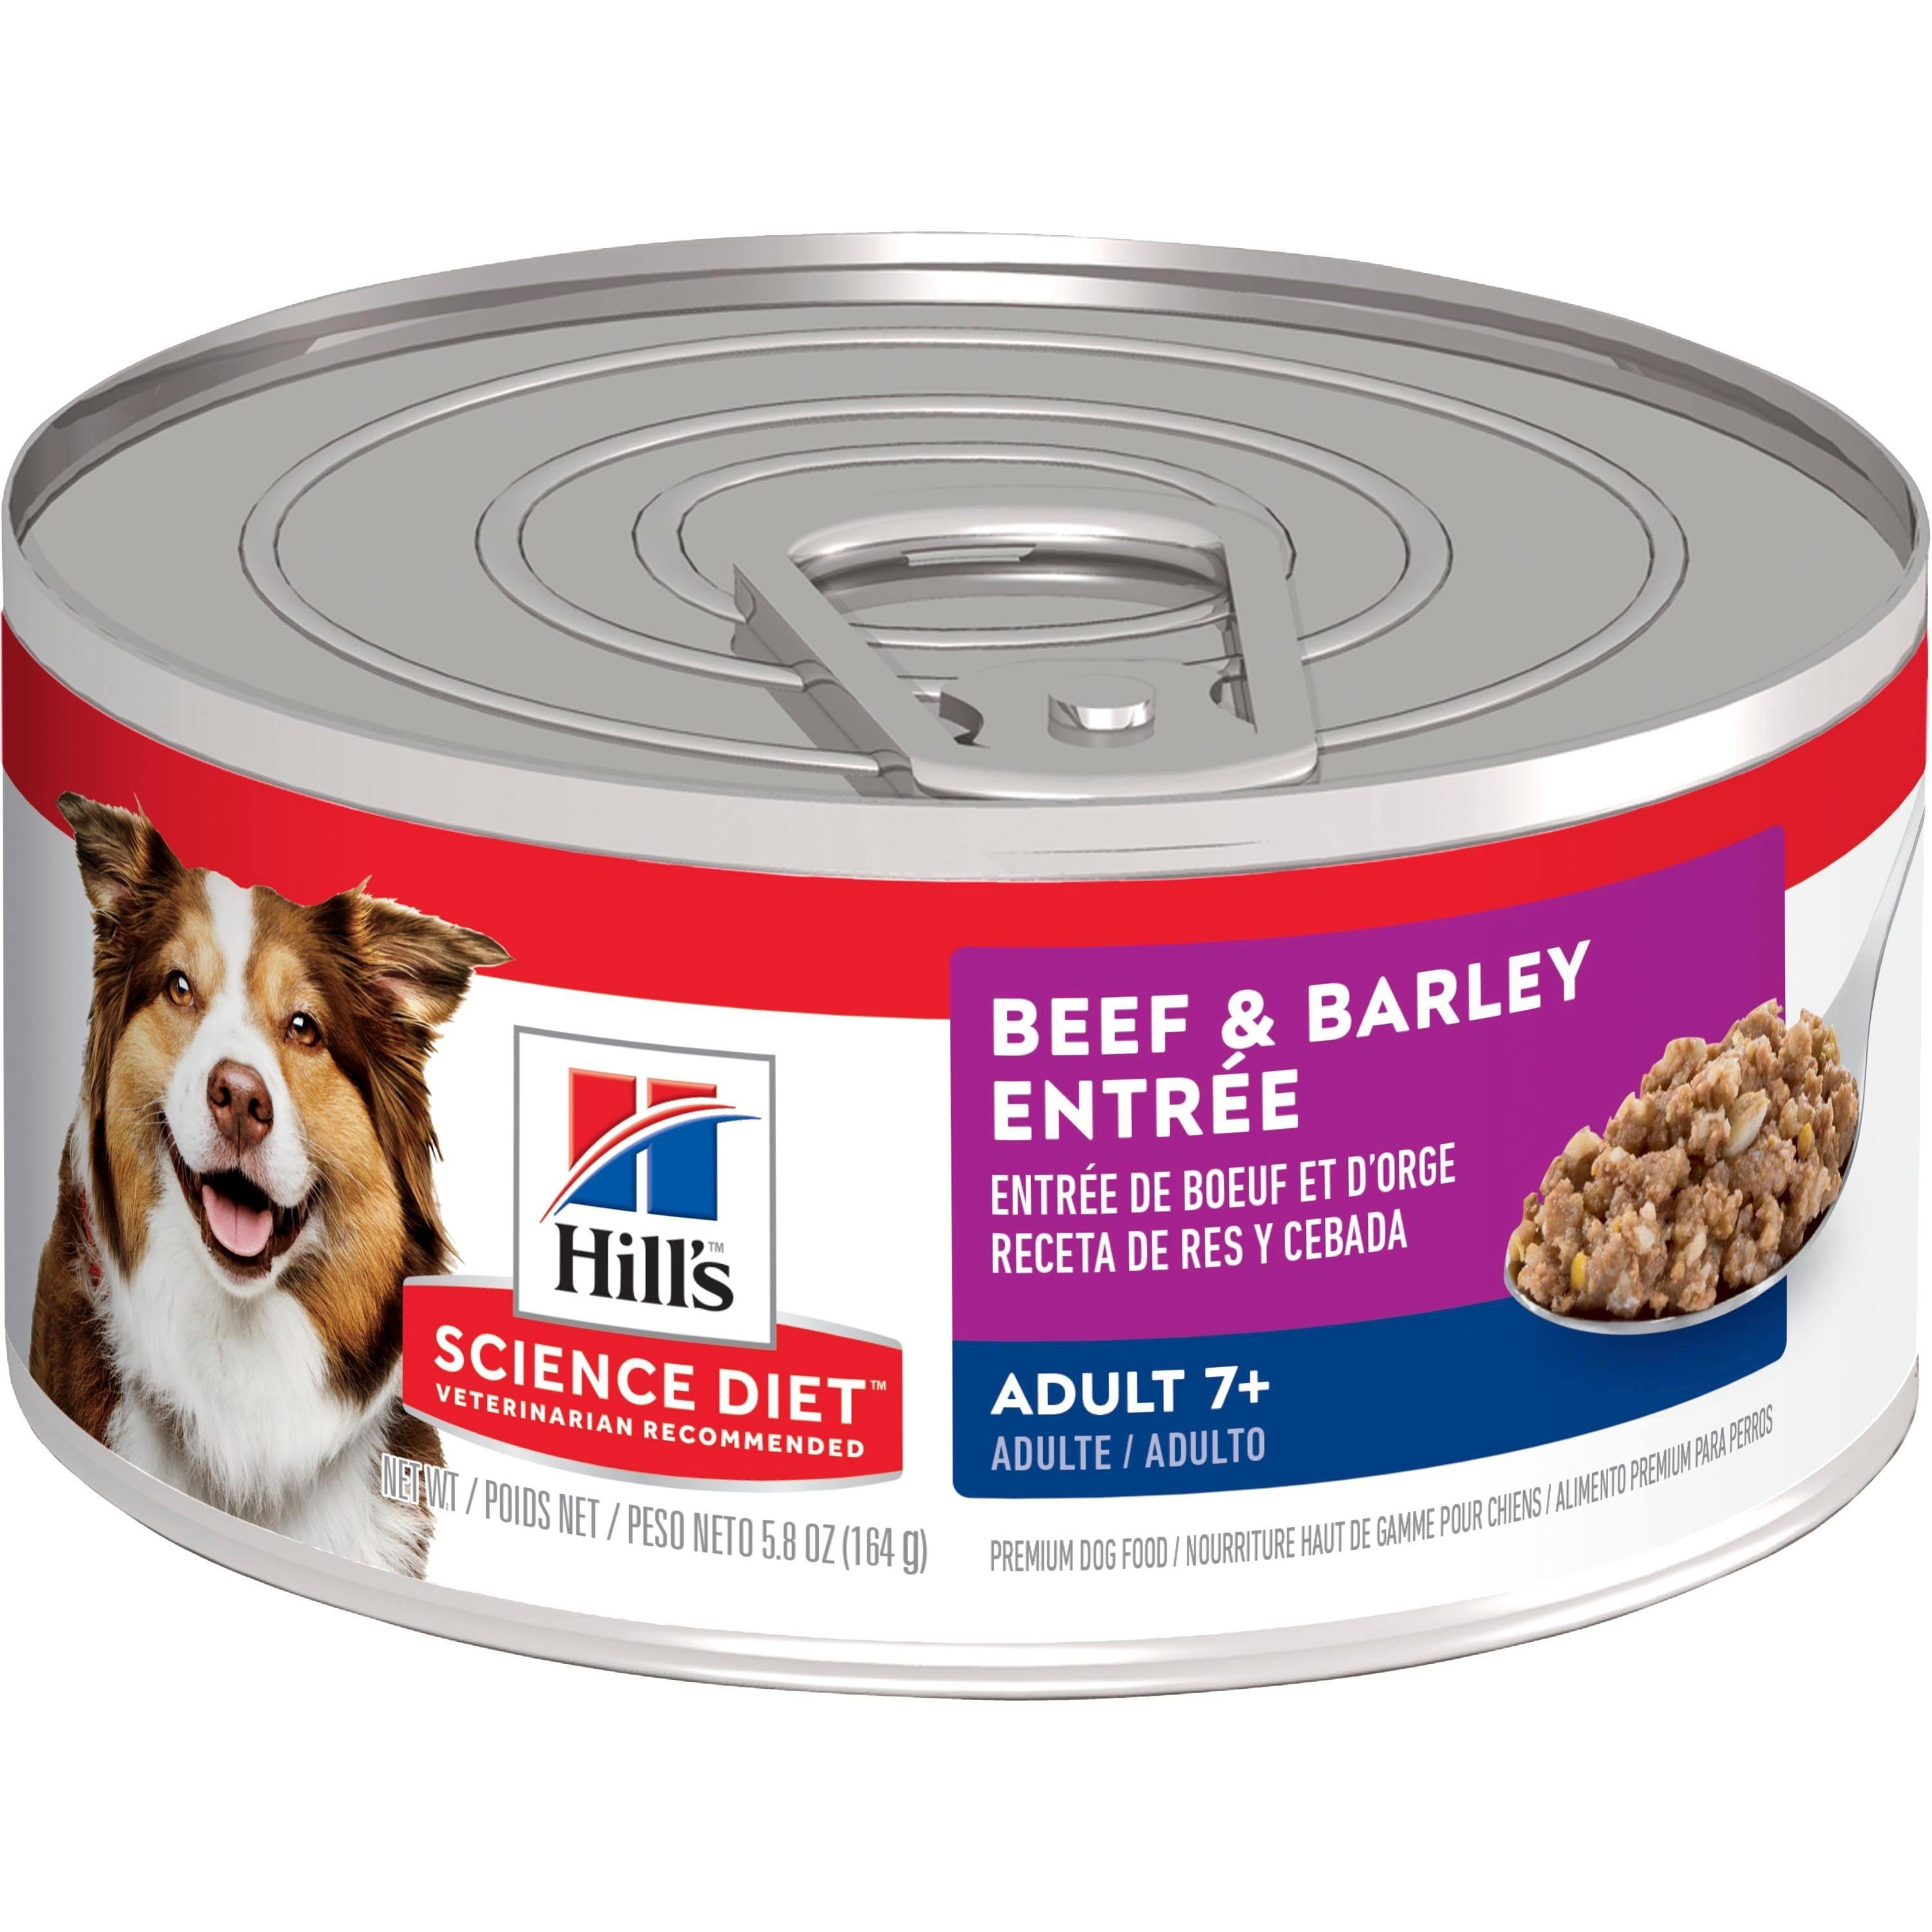 Hill's Science Diet Dog Food - Beef and Barley Entree, 164g